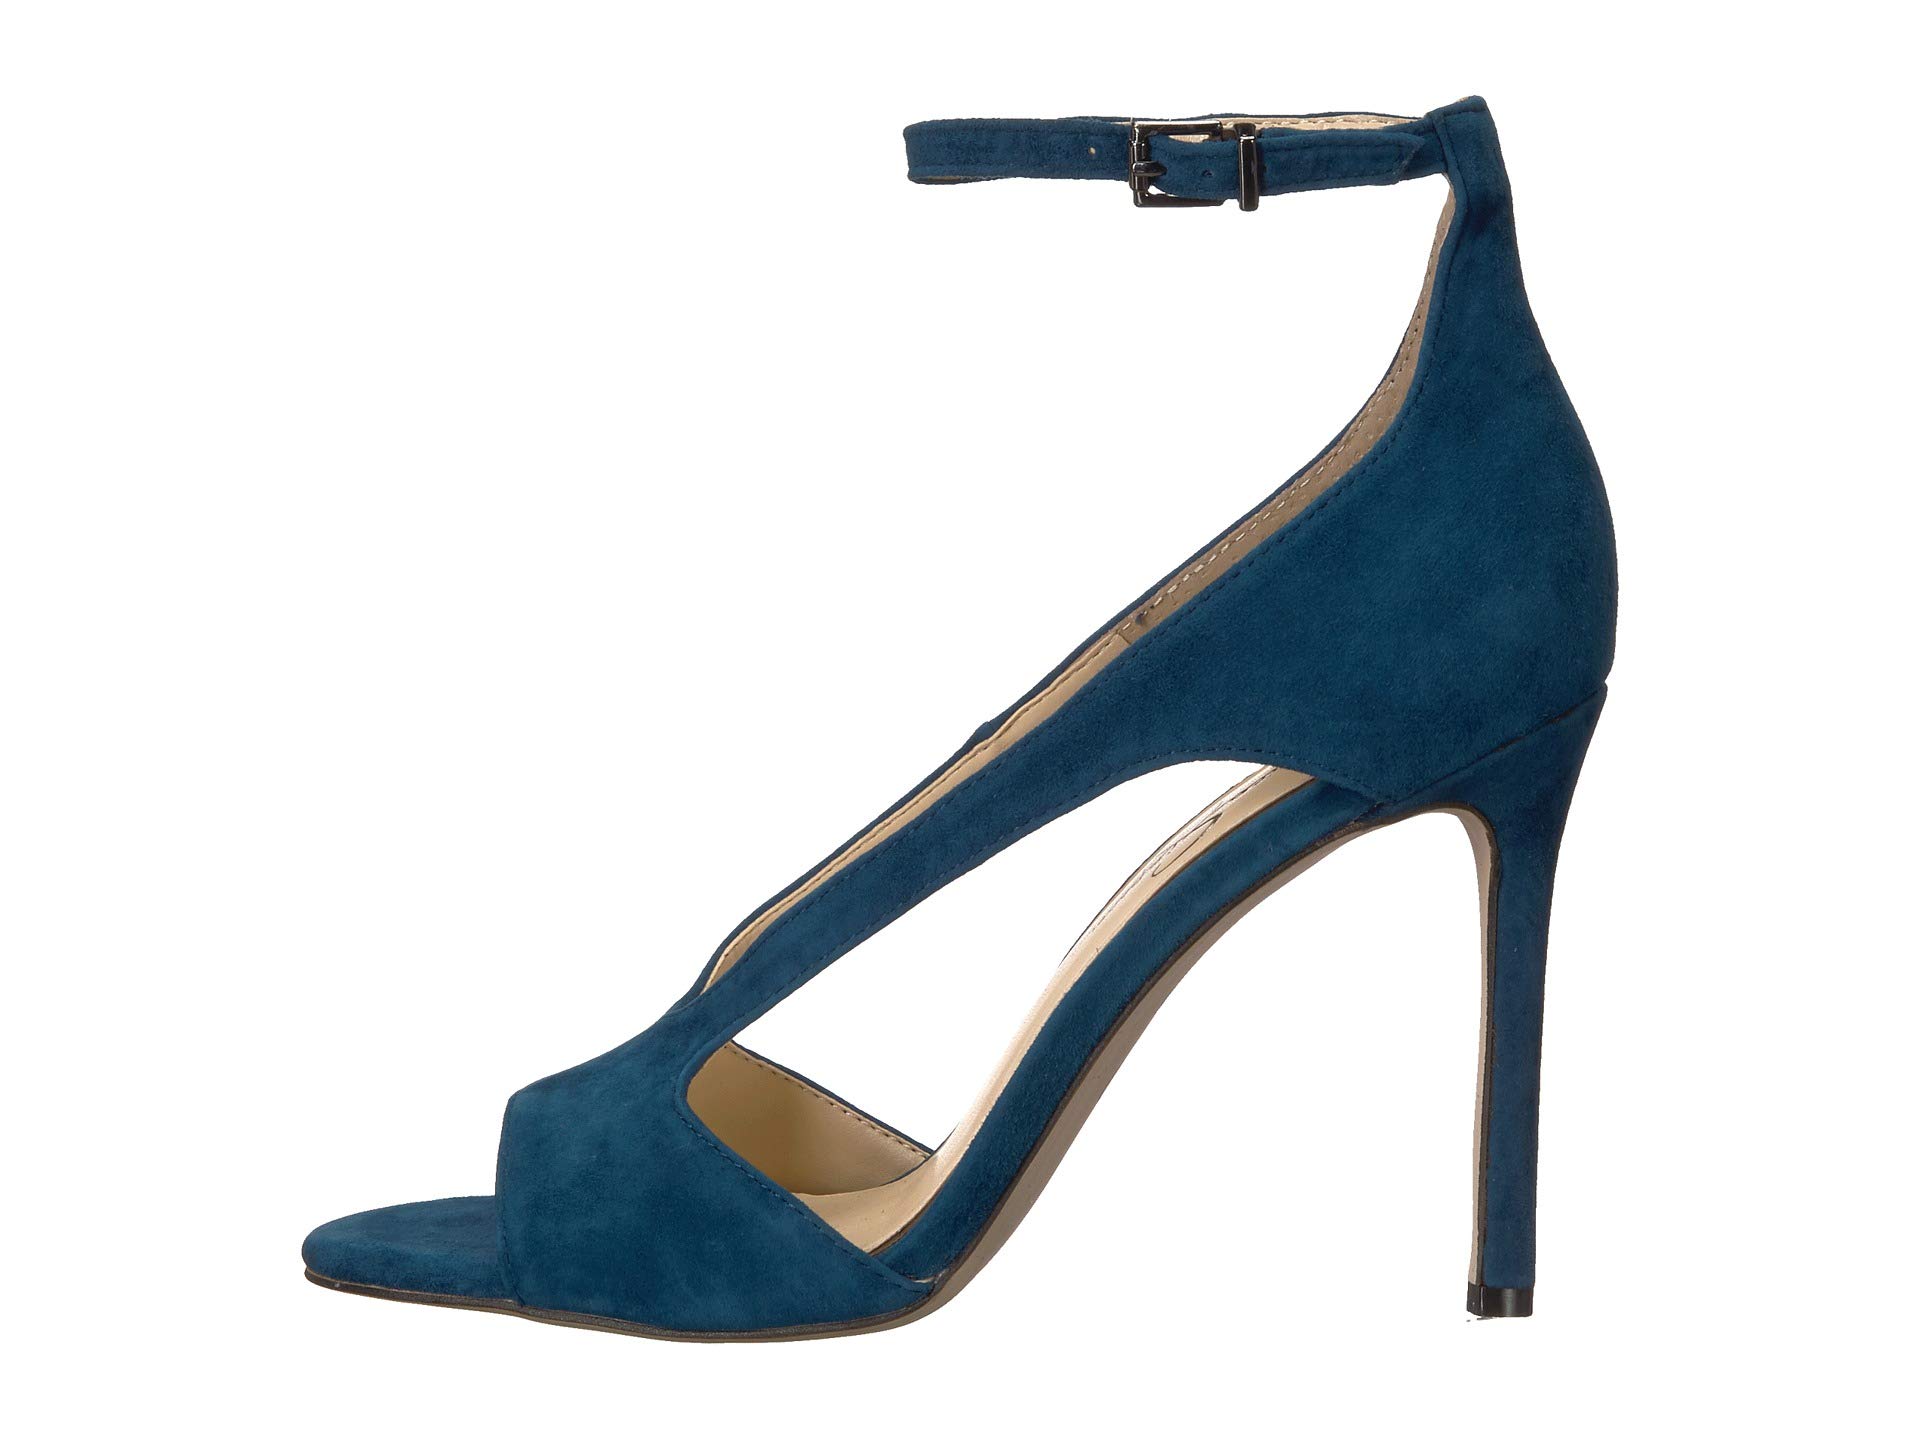 Jessica Simpson Women's Jasta Suede Azurite Ankle-High Leather Pump - 5.5M - image 1 of 5